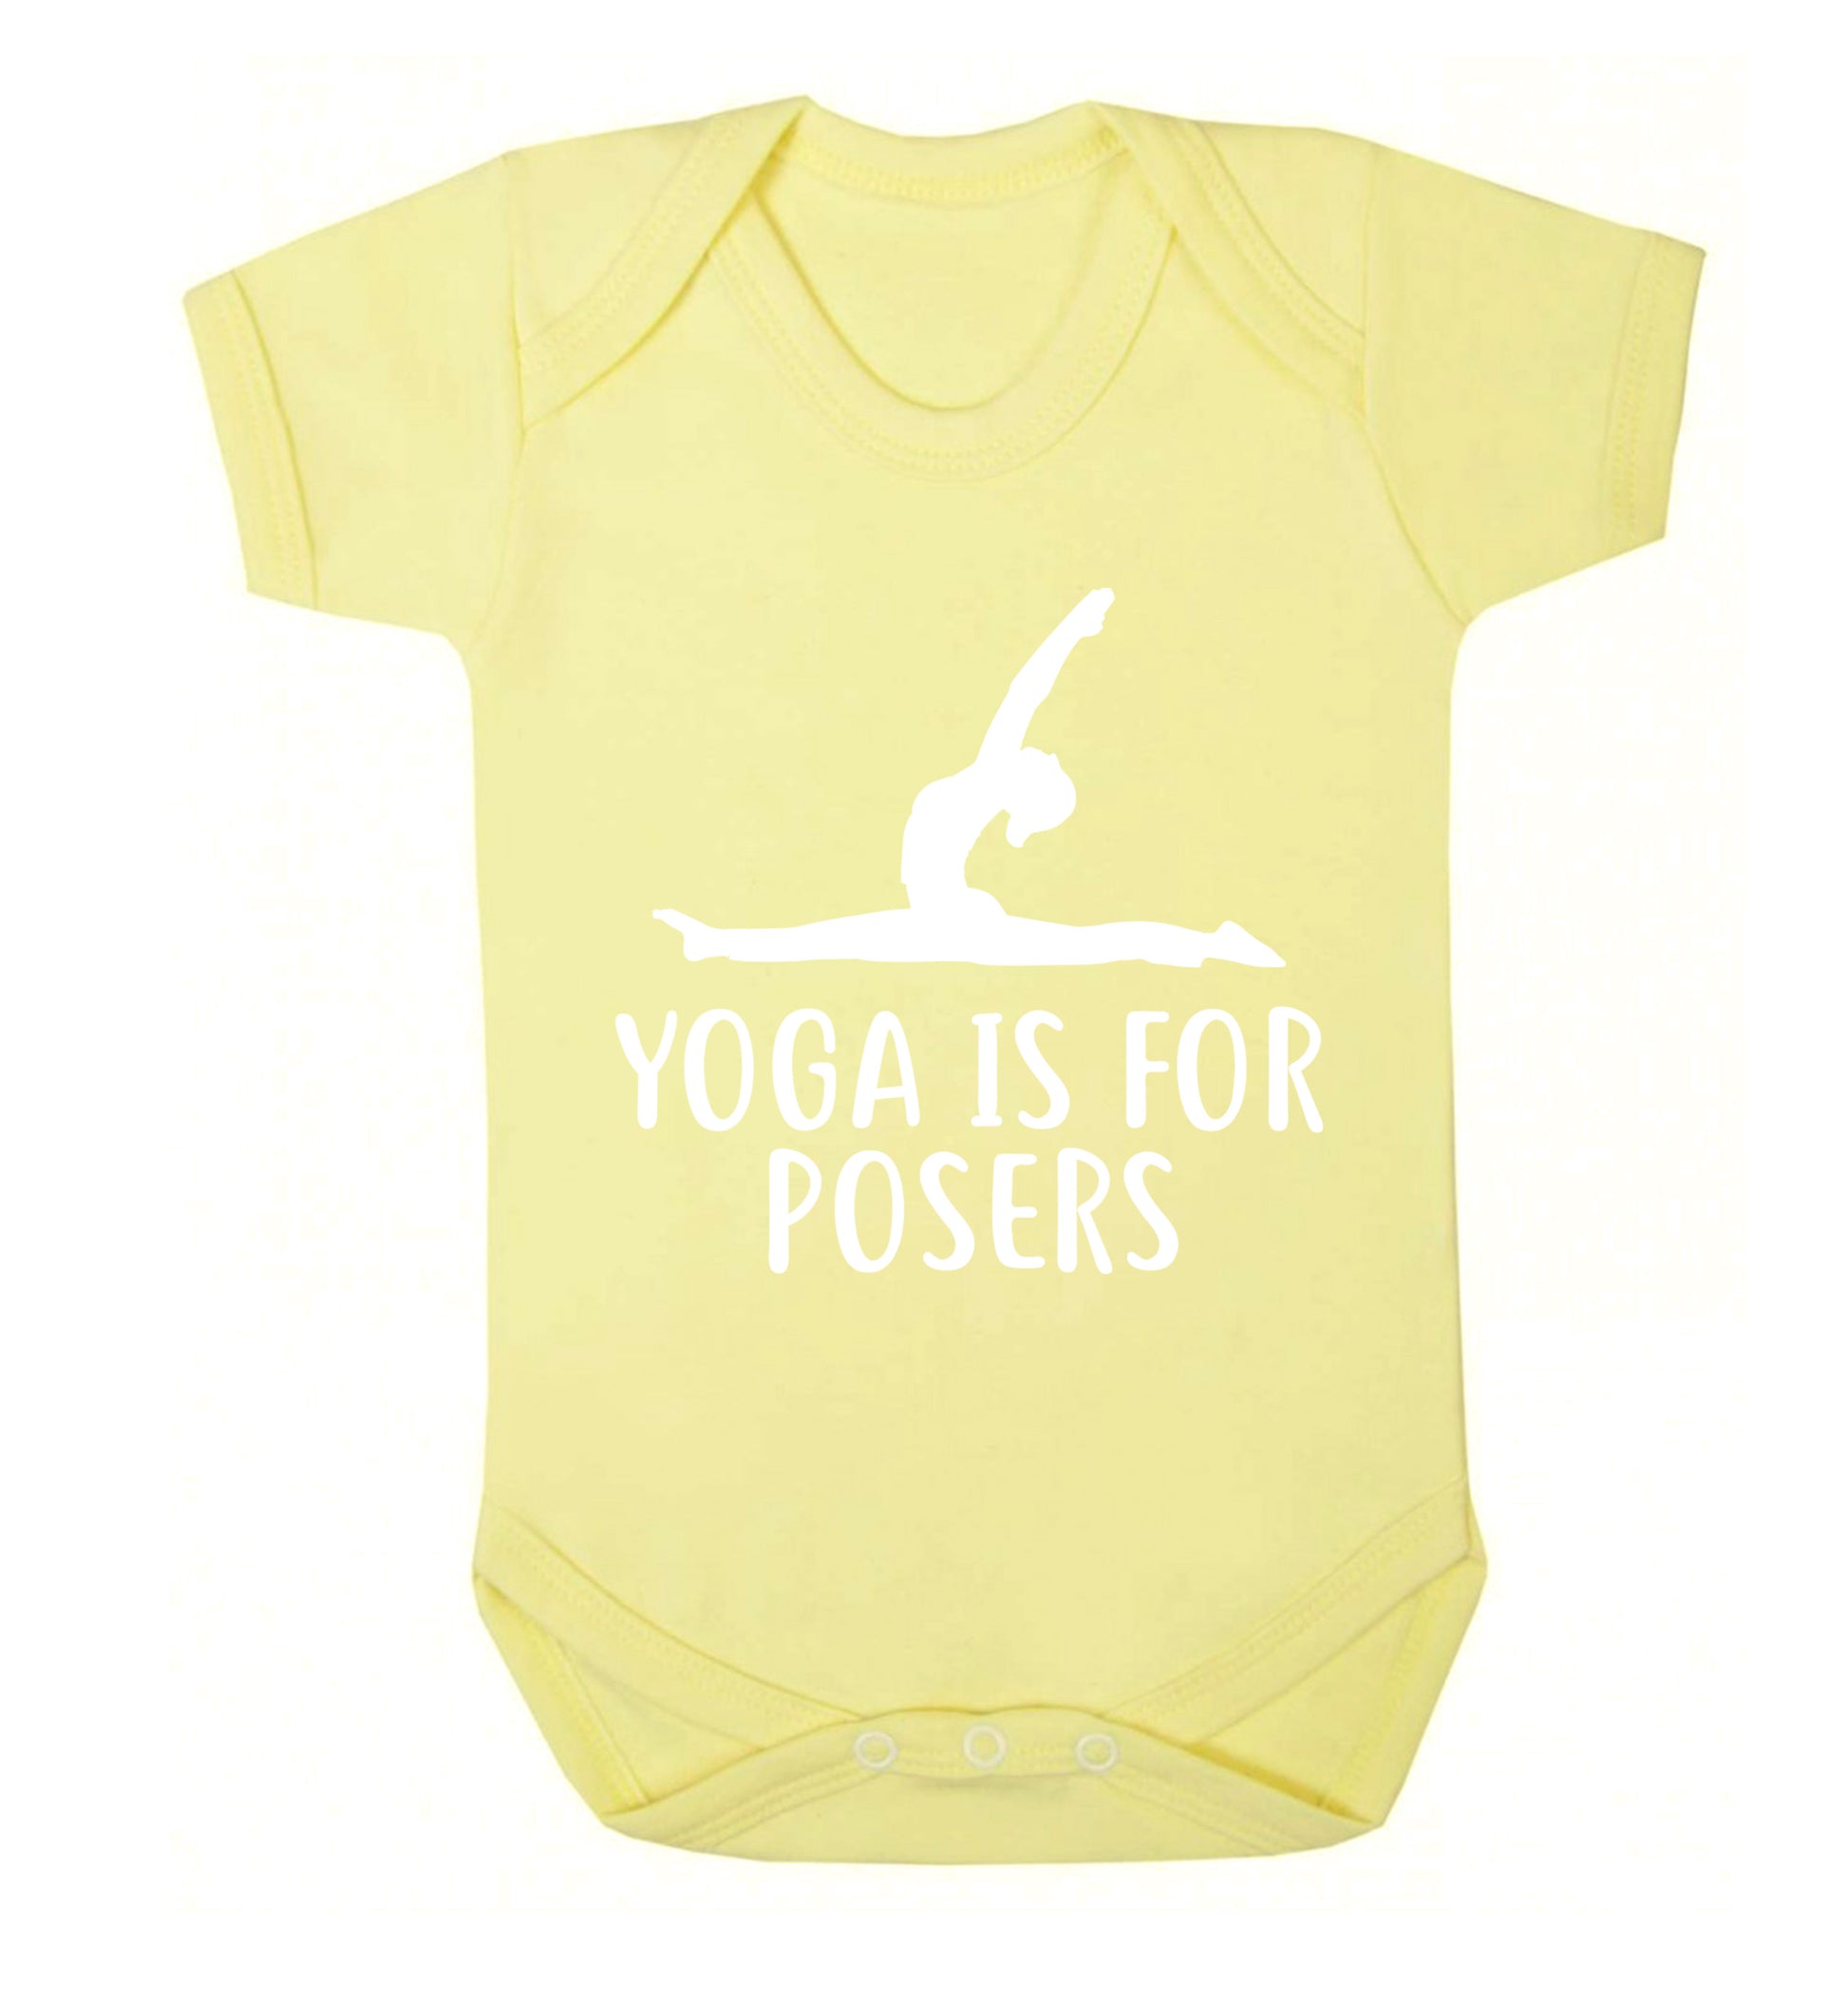 Yoga is for posers Baby Vest pale yellow 18-24 months